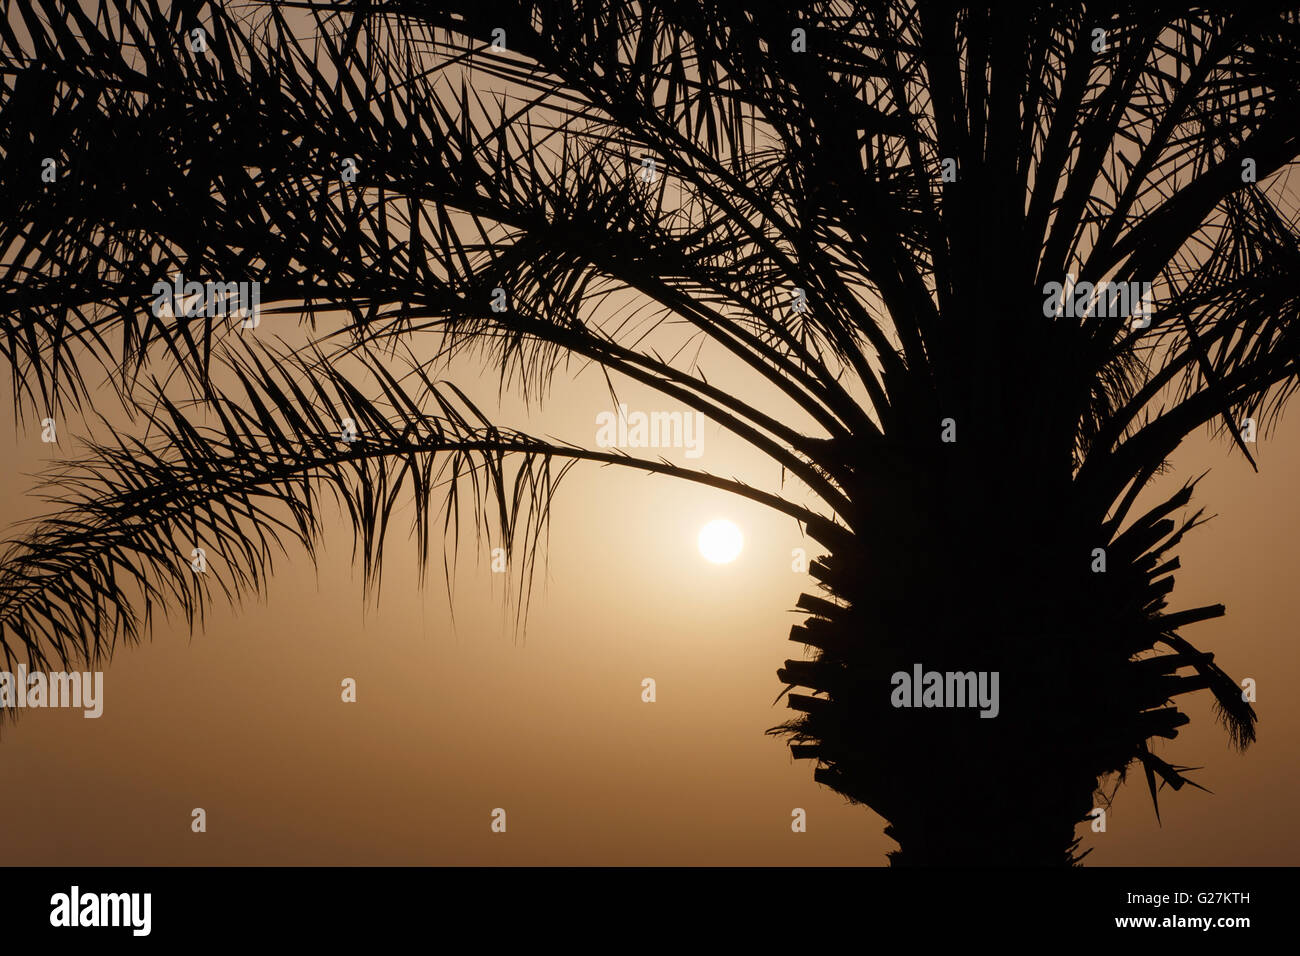 silhouette of palm tree at sunrise Stock Photo